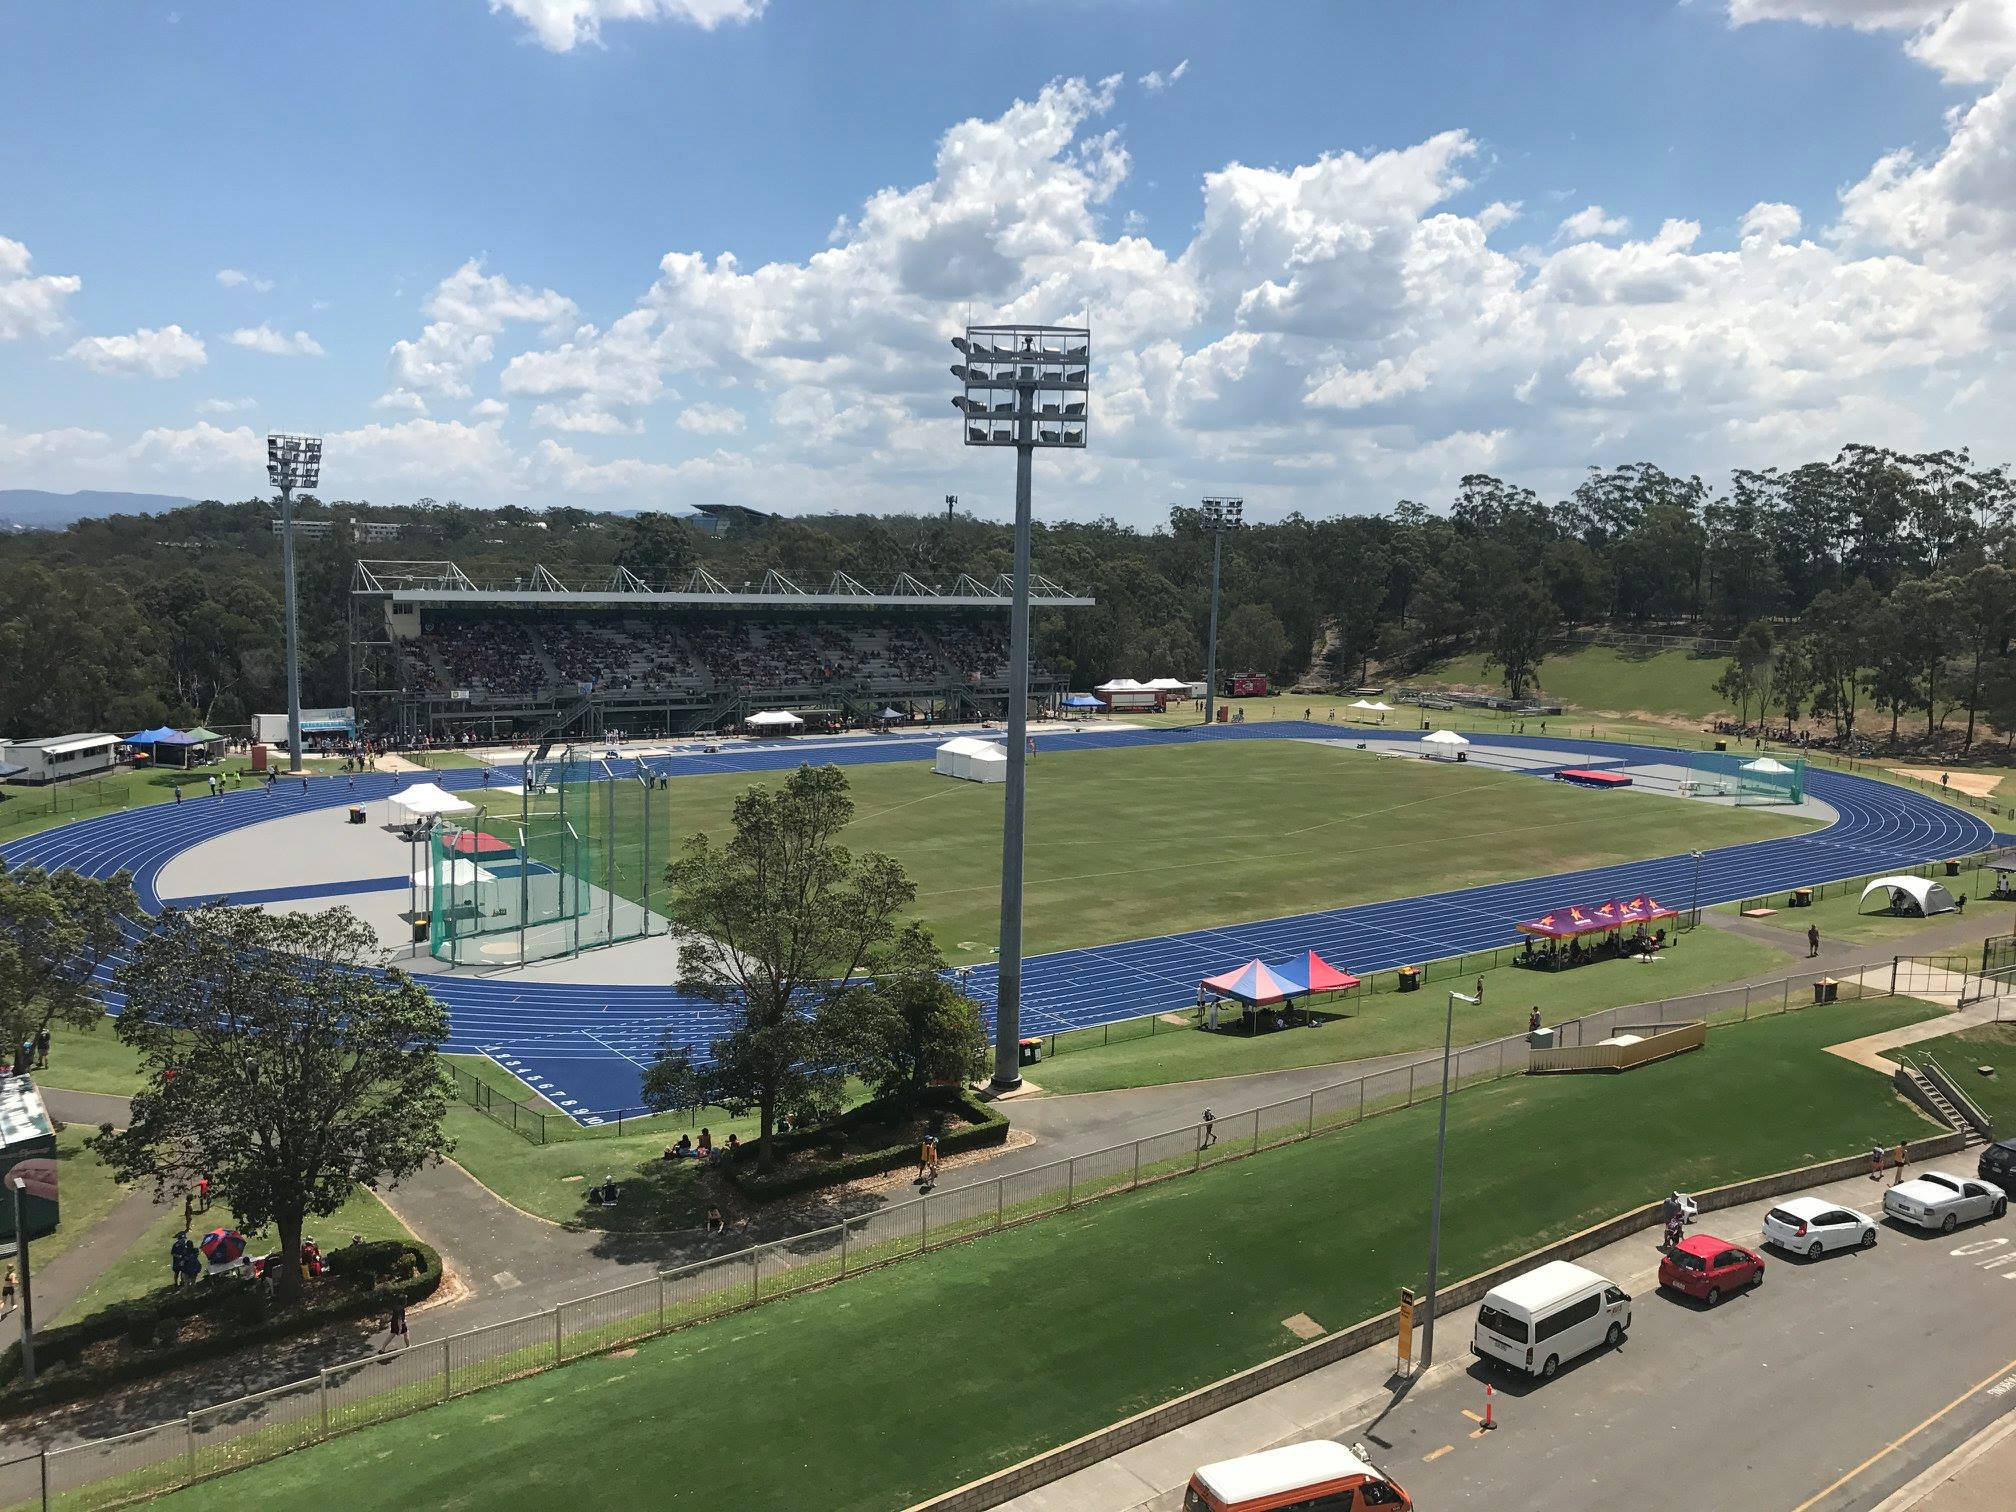 England's athletes will be using the Queensland Sport and Athletics Centre in Brisbane to prepare for the Commonwealth Games and its swimmers will be training at the Somerville House swimming pool ©Facebook 